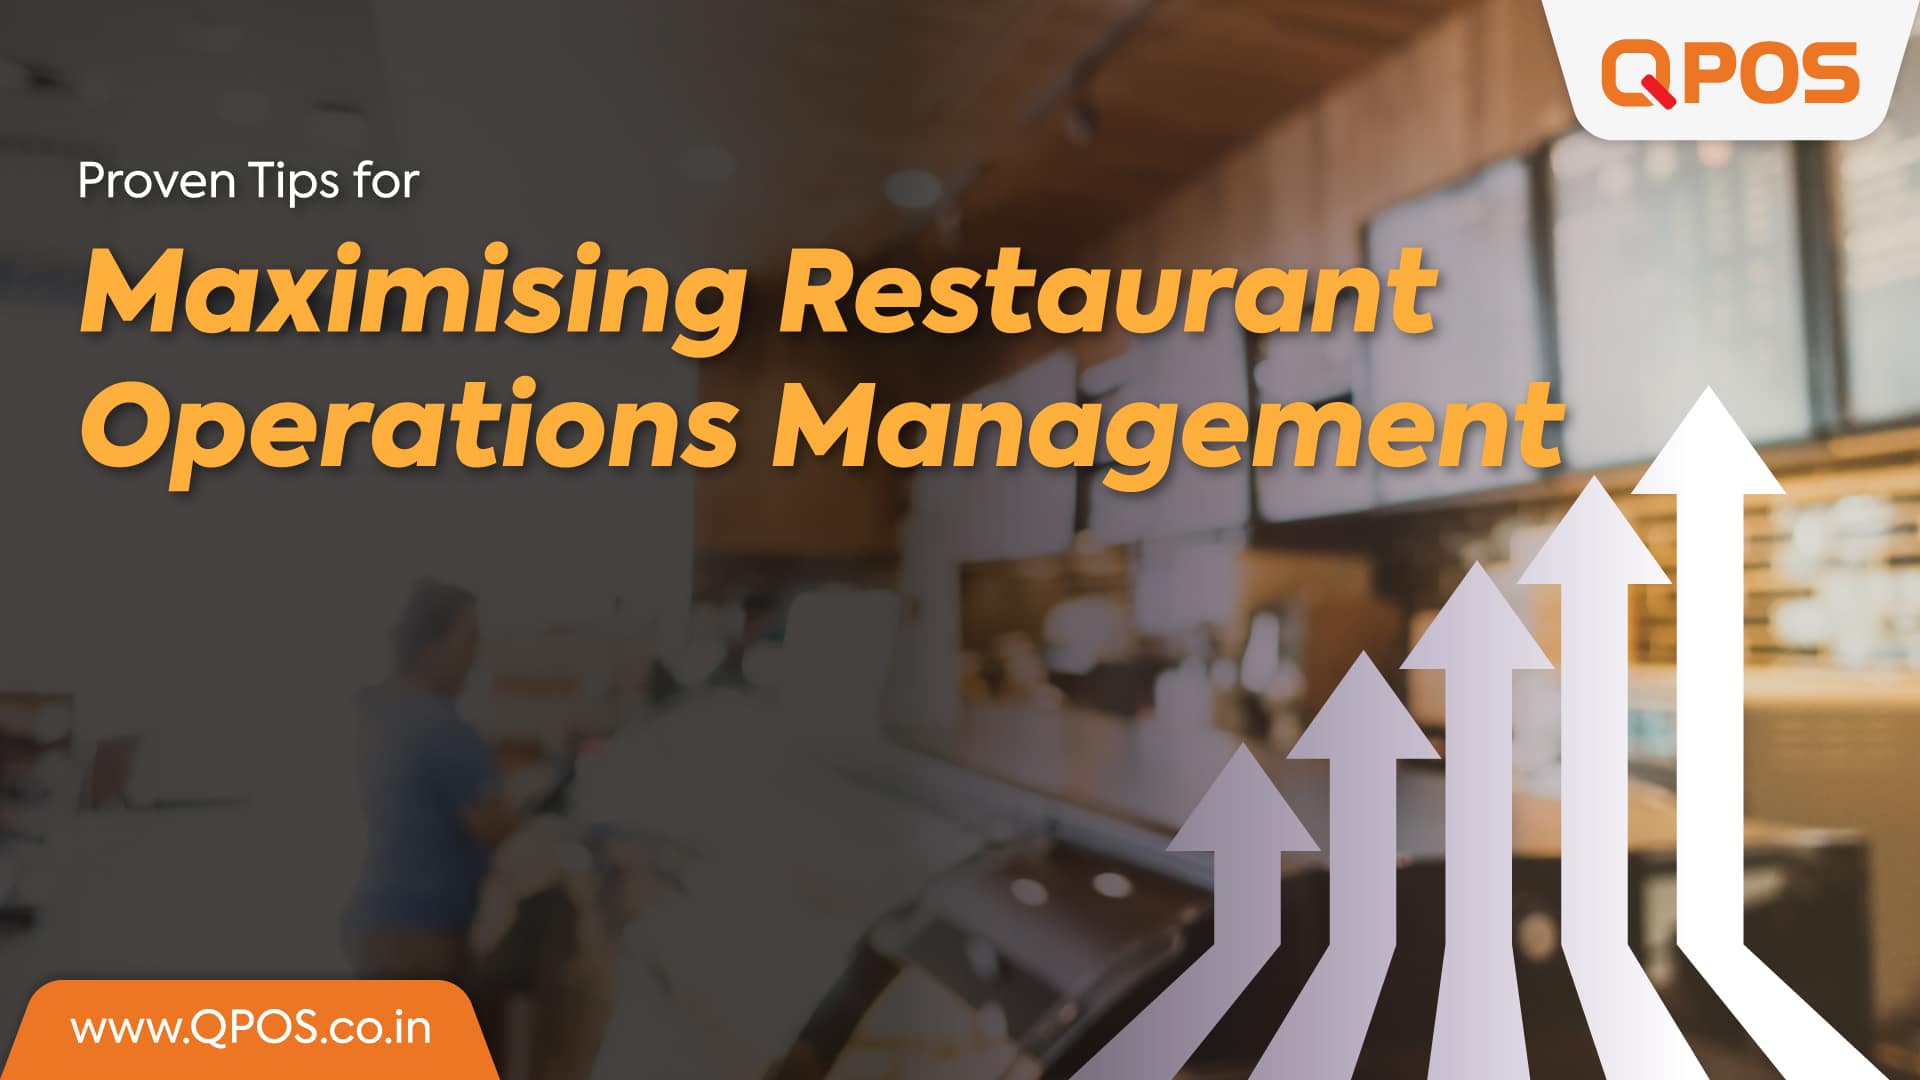 6 Tips for Stress-Free Restaurant Operations Management